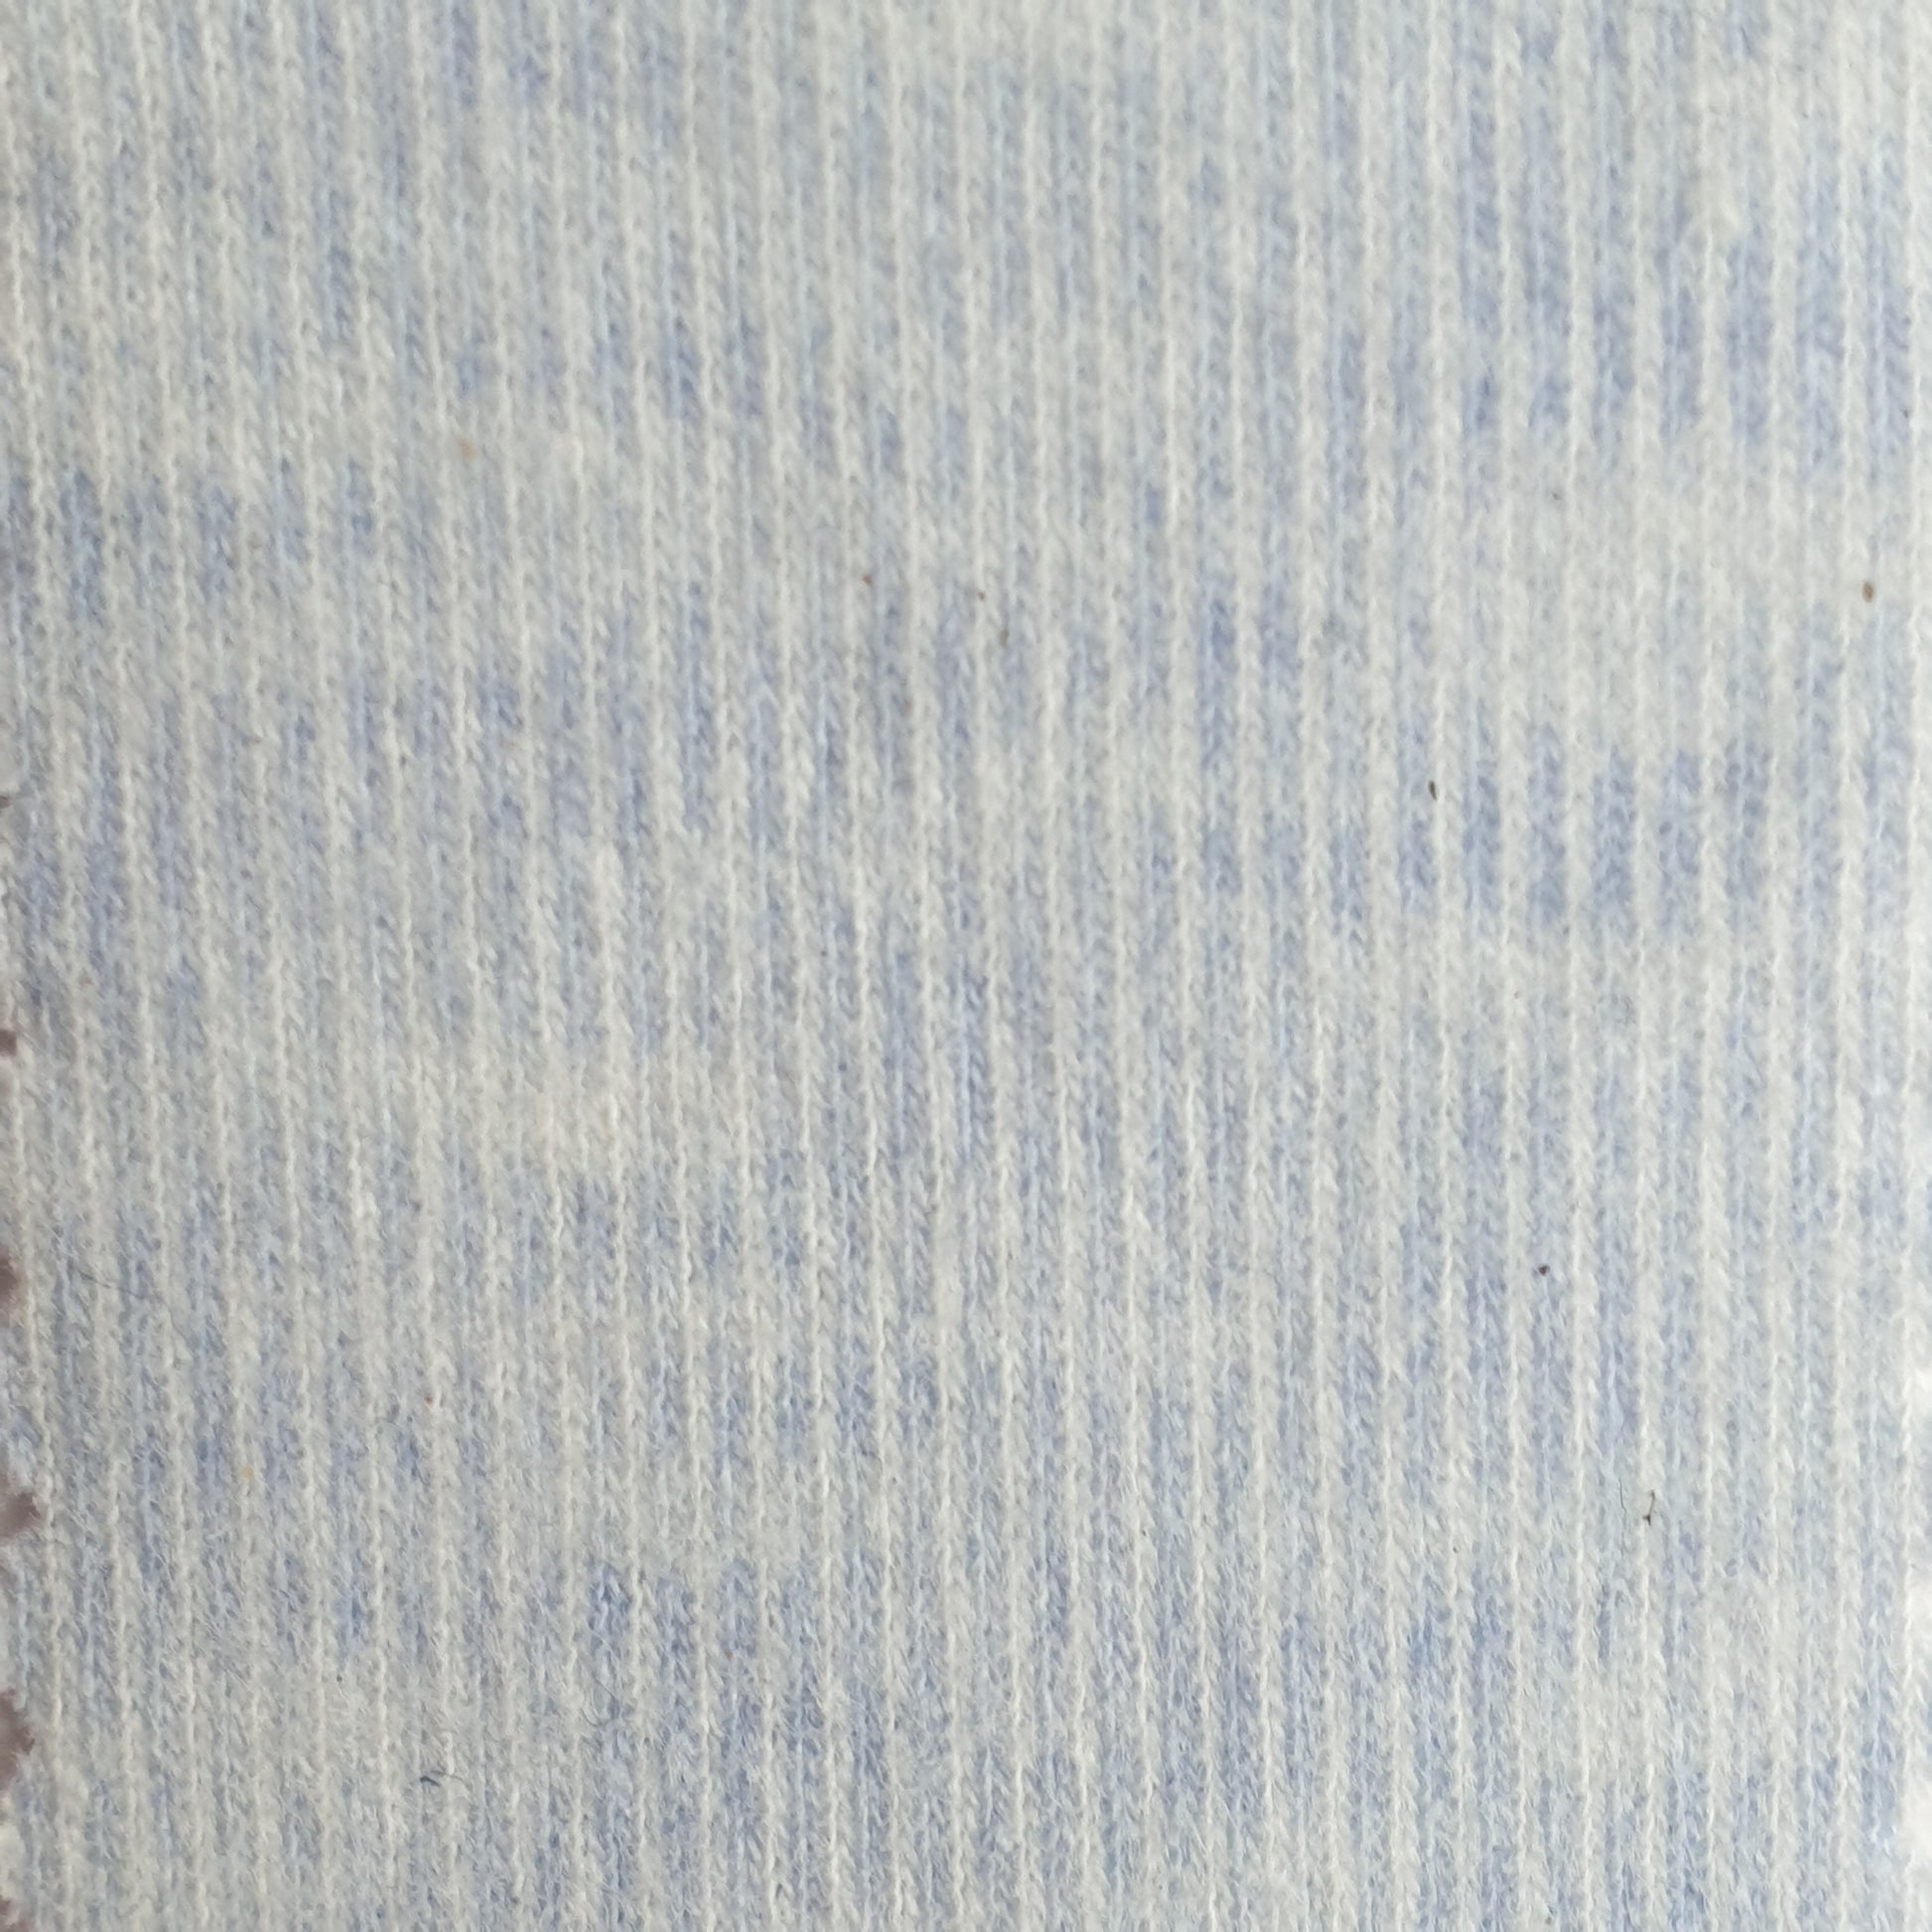 Pastel Blue Marle - 2 way stretch 100% Cotton Jersey Fabric - You’ve Got Me In Stitches